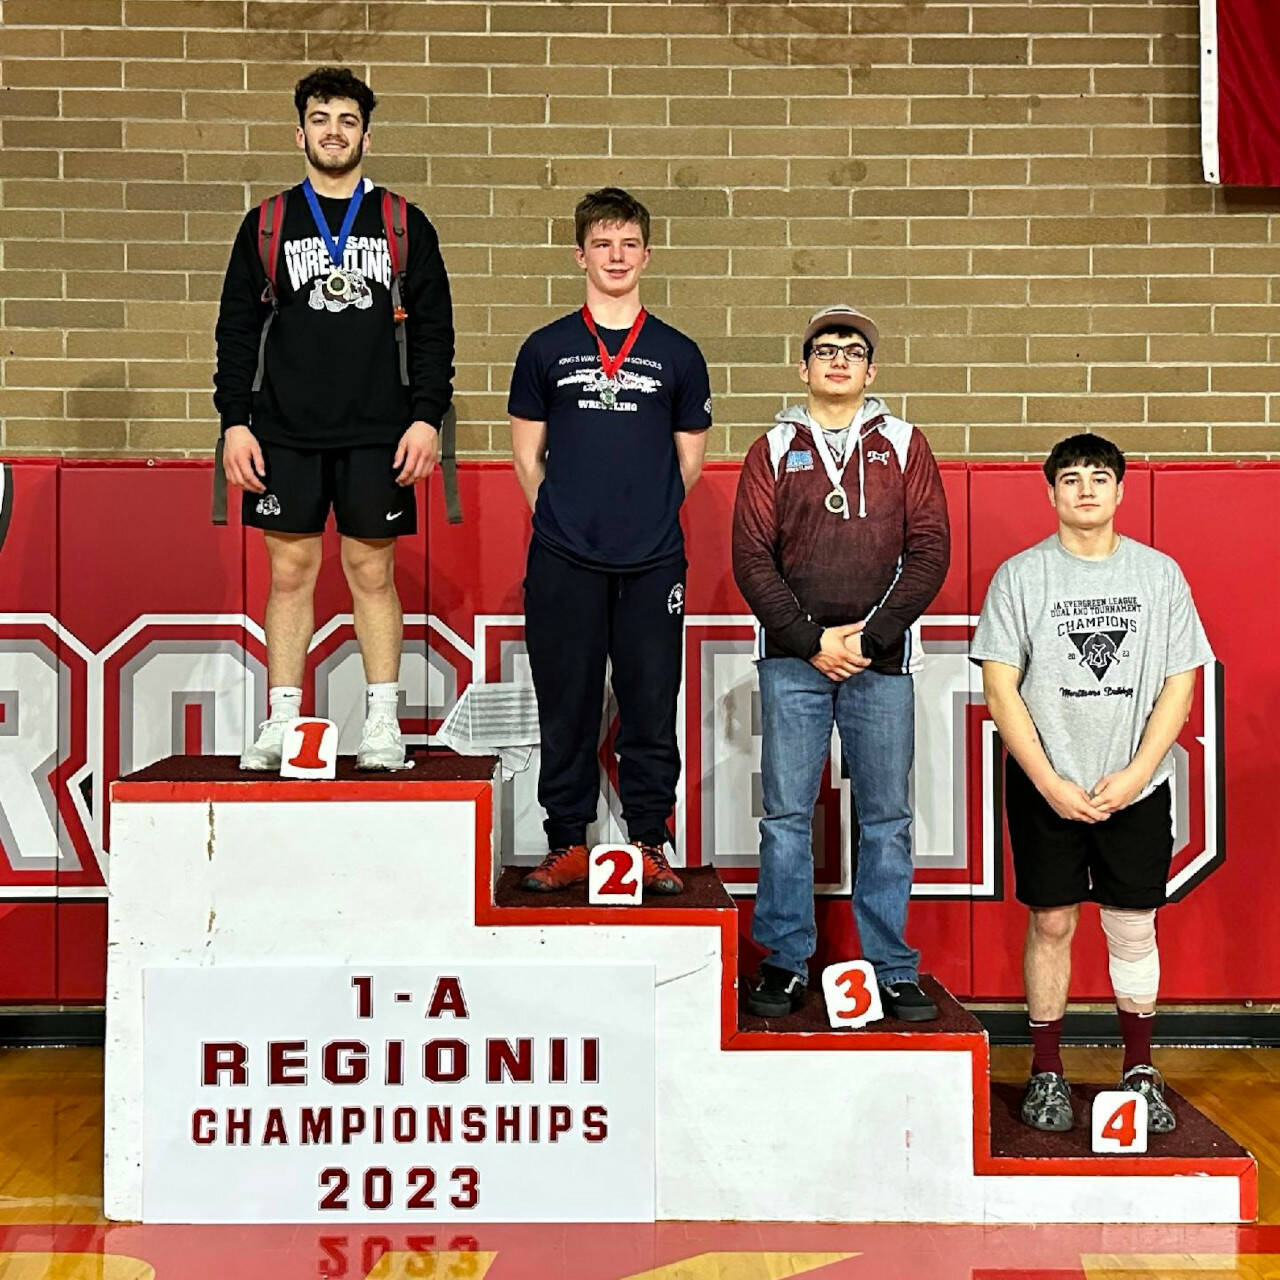 SUBMITTED PHOTO
Montesano’s Mateo Sanchez, left, won the 195-pound championship at the 1A Region 3 Championships on Saturday in Castle Rock.